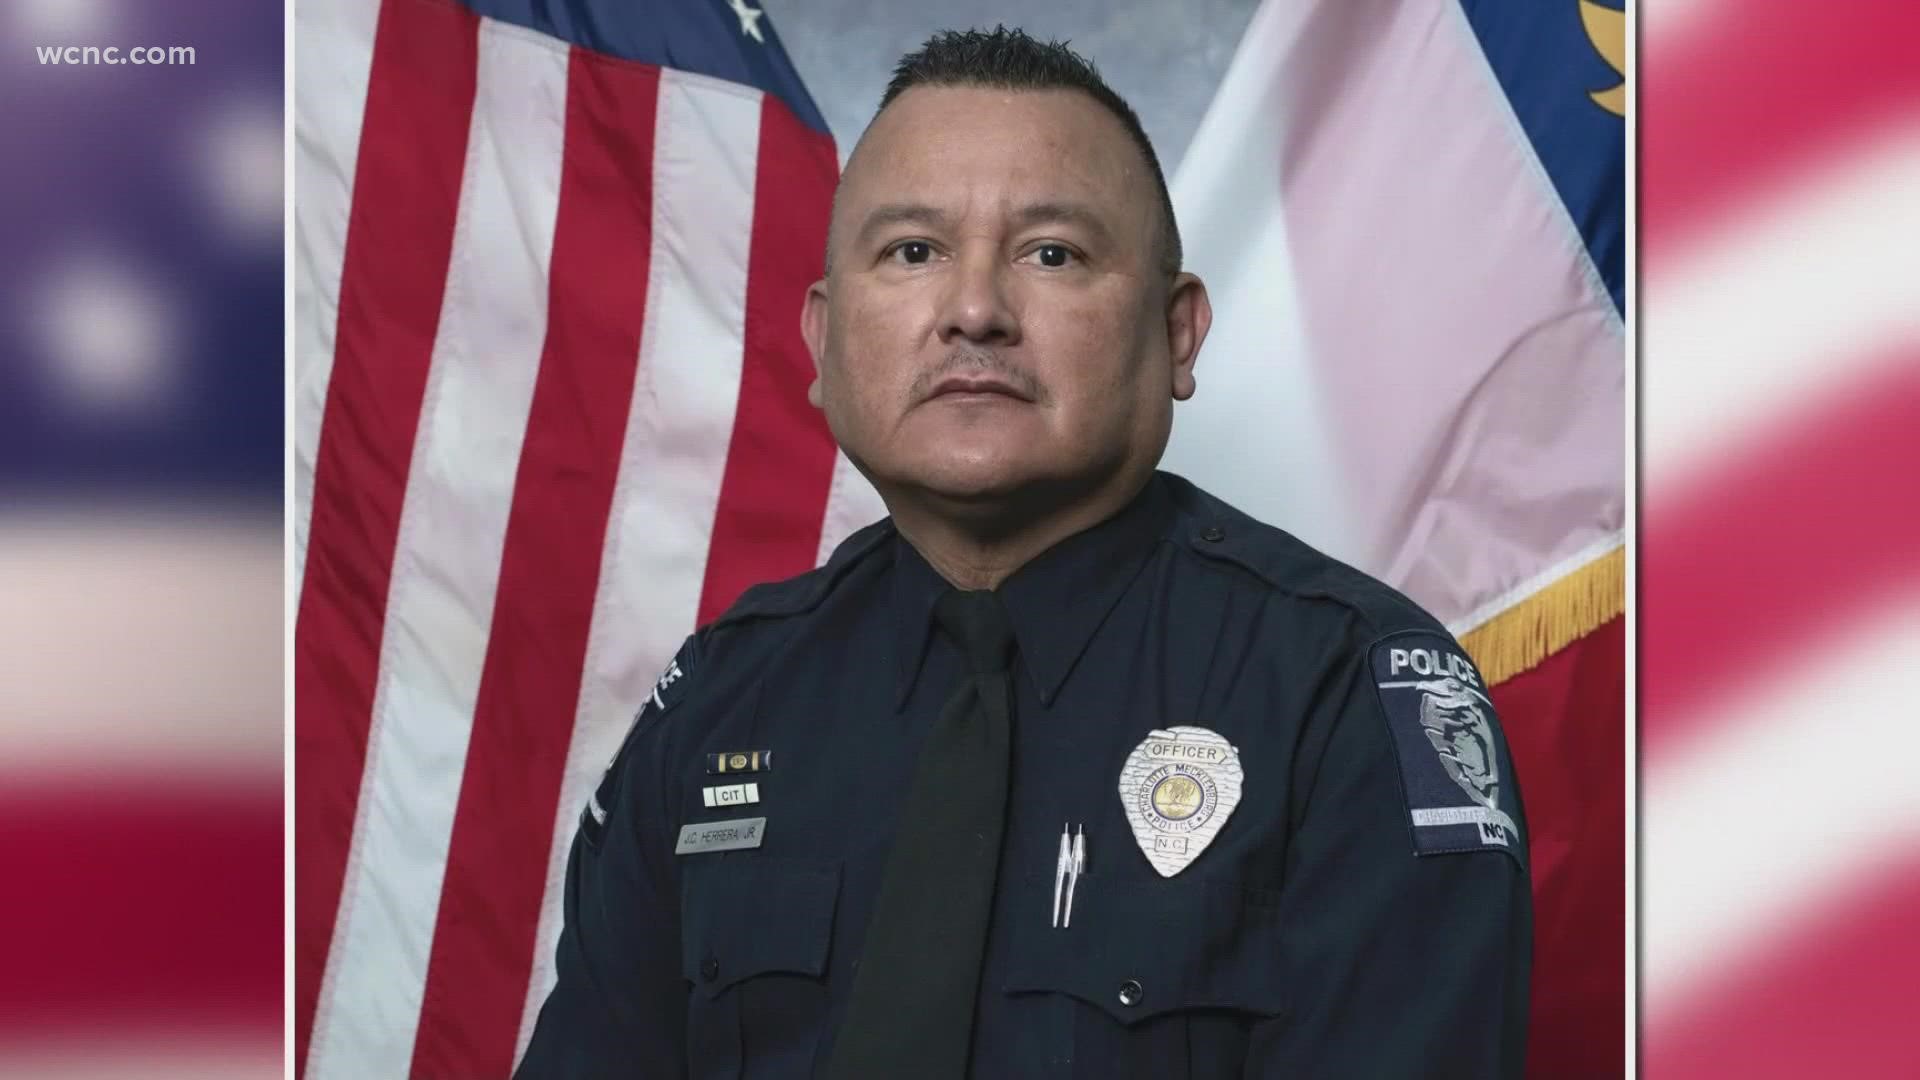 Officer Julio Herrera died from COVID-19, County Commissioner George Dunlap said. Herrera was just 4 months shy of retirement.